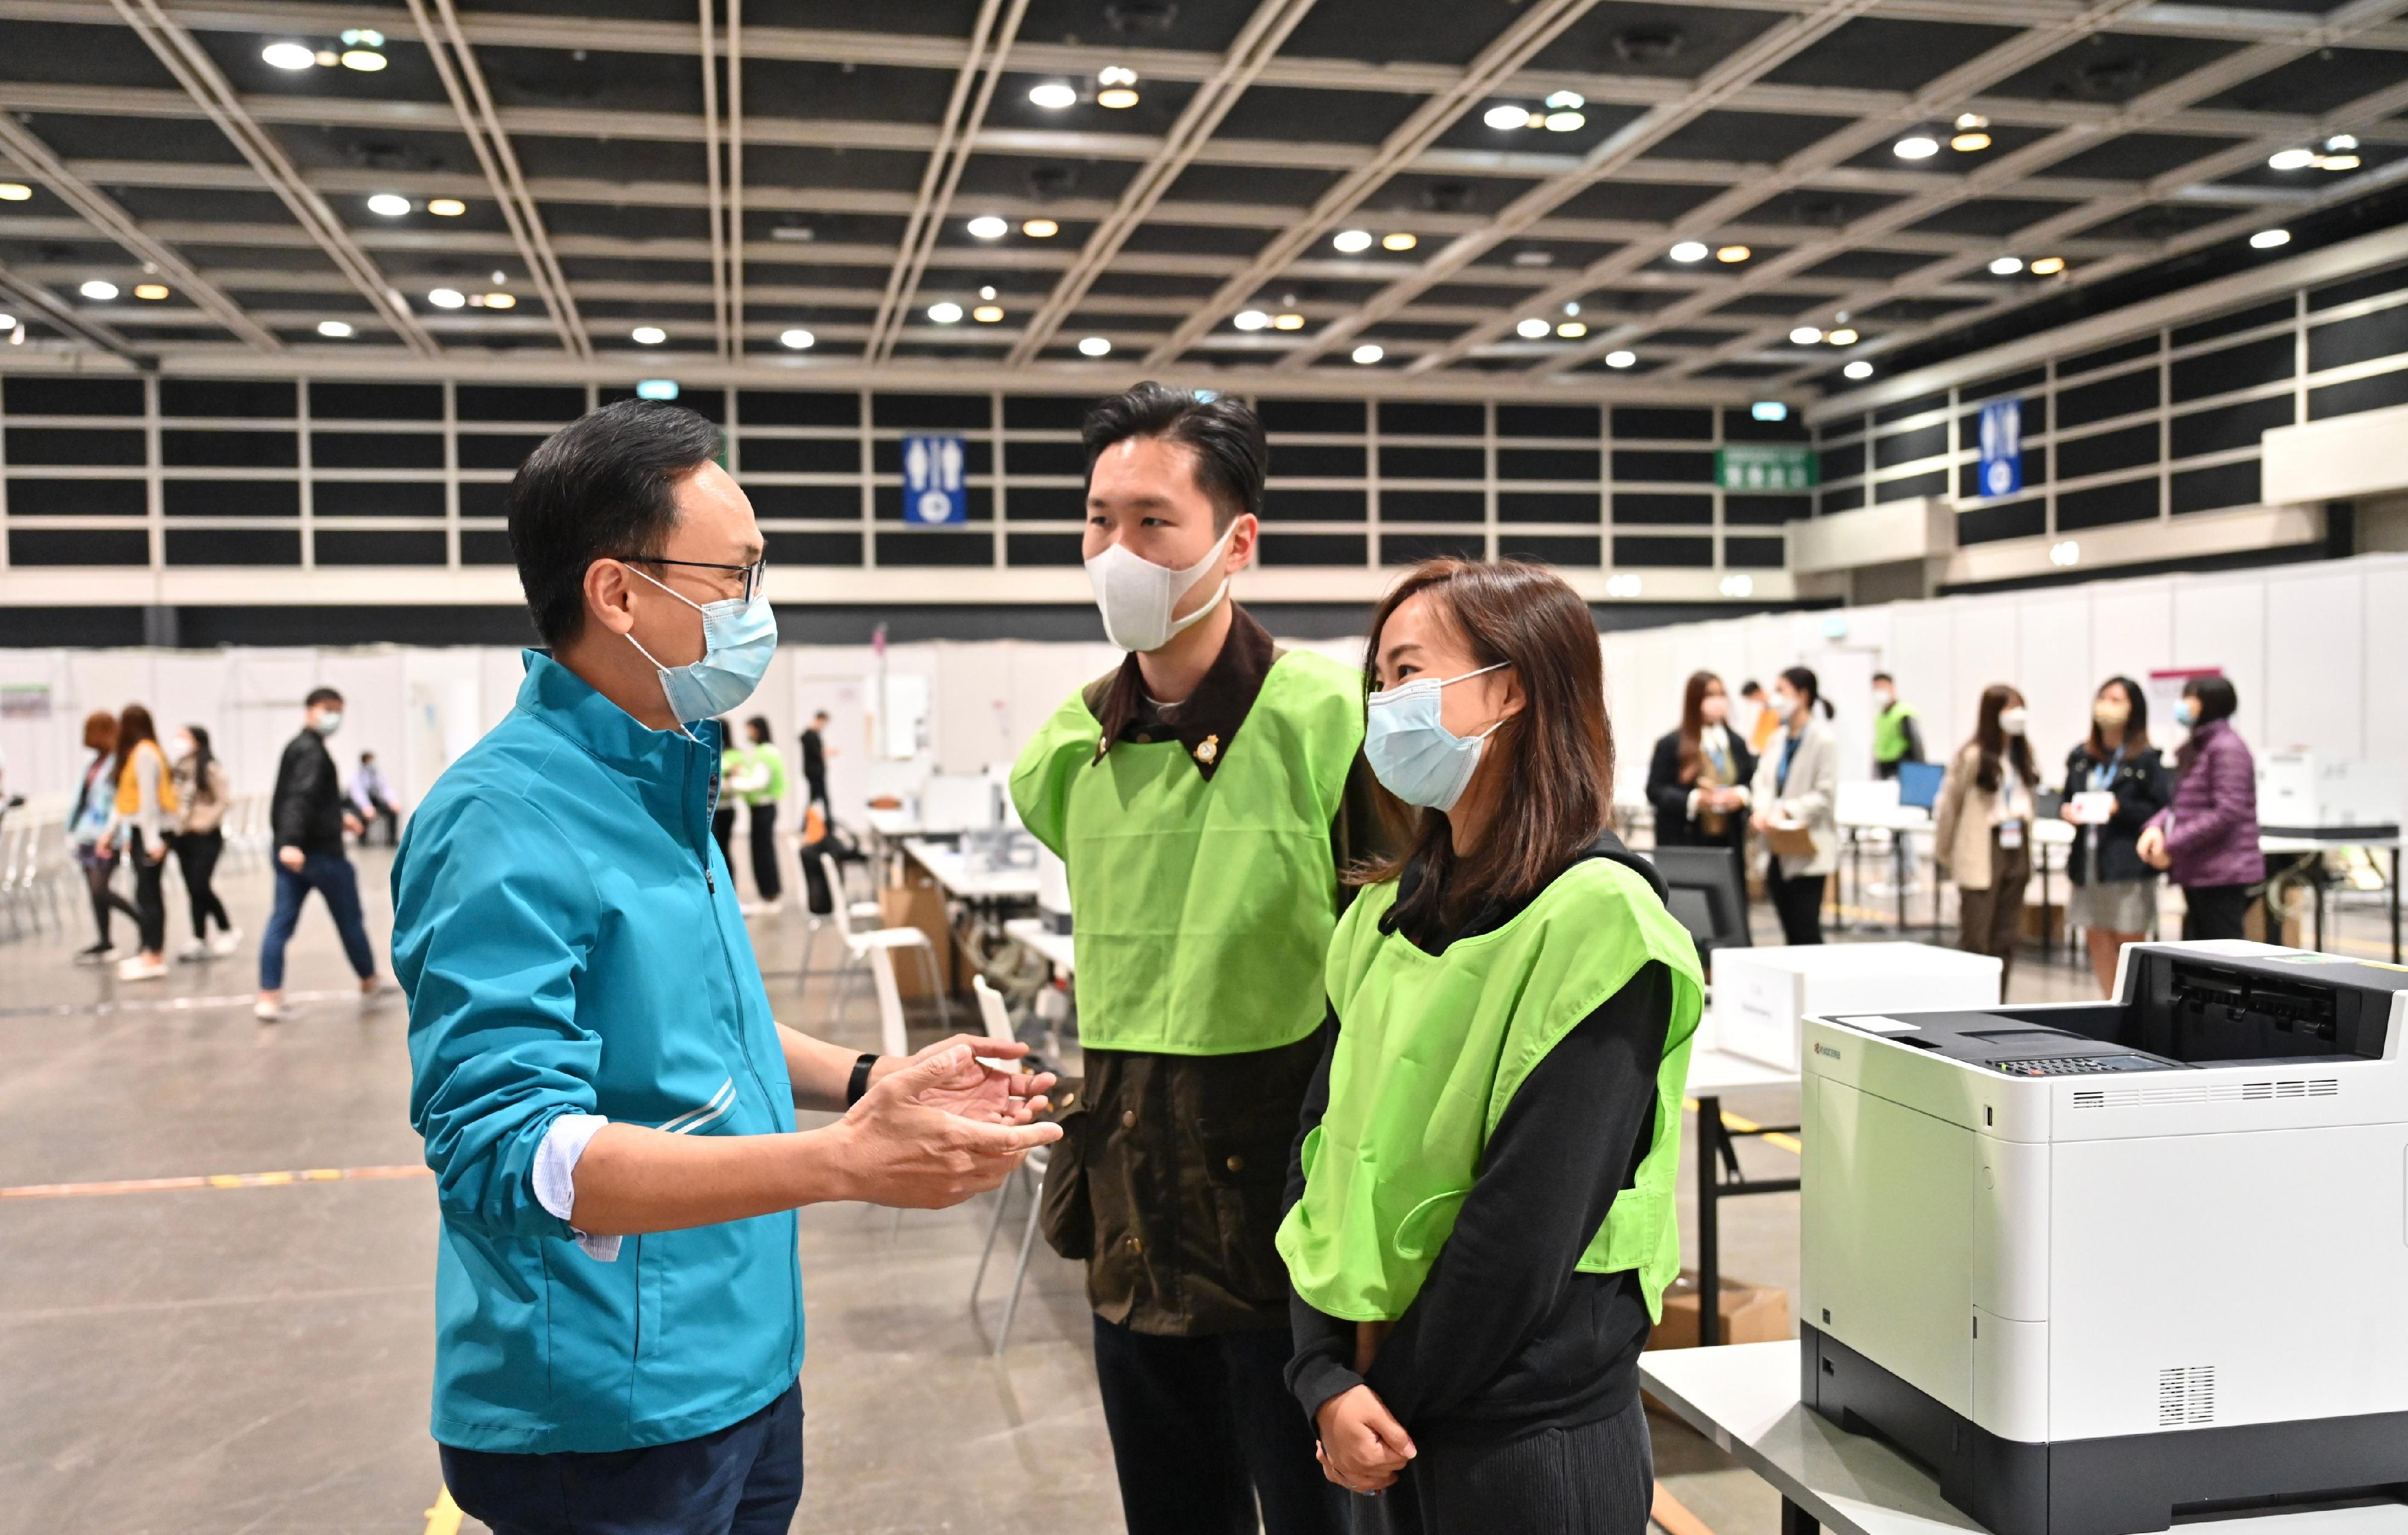 The Secretary for the Civil Service, Mr Patrick Nip (left), visited the polling station and the counting station at the Hong Kong Convention and Exhibition Centre today (December 18) to give his support to civil service colleagues who are busy making preparations for the election. He said it is also an obligatory duty and important mission for colleagues to undertake electoral tasks.